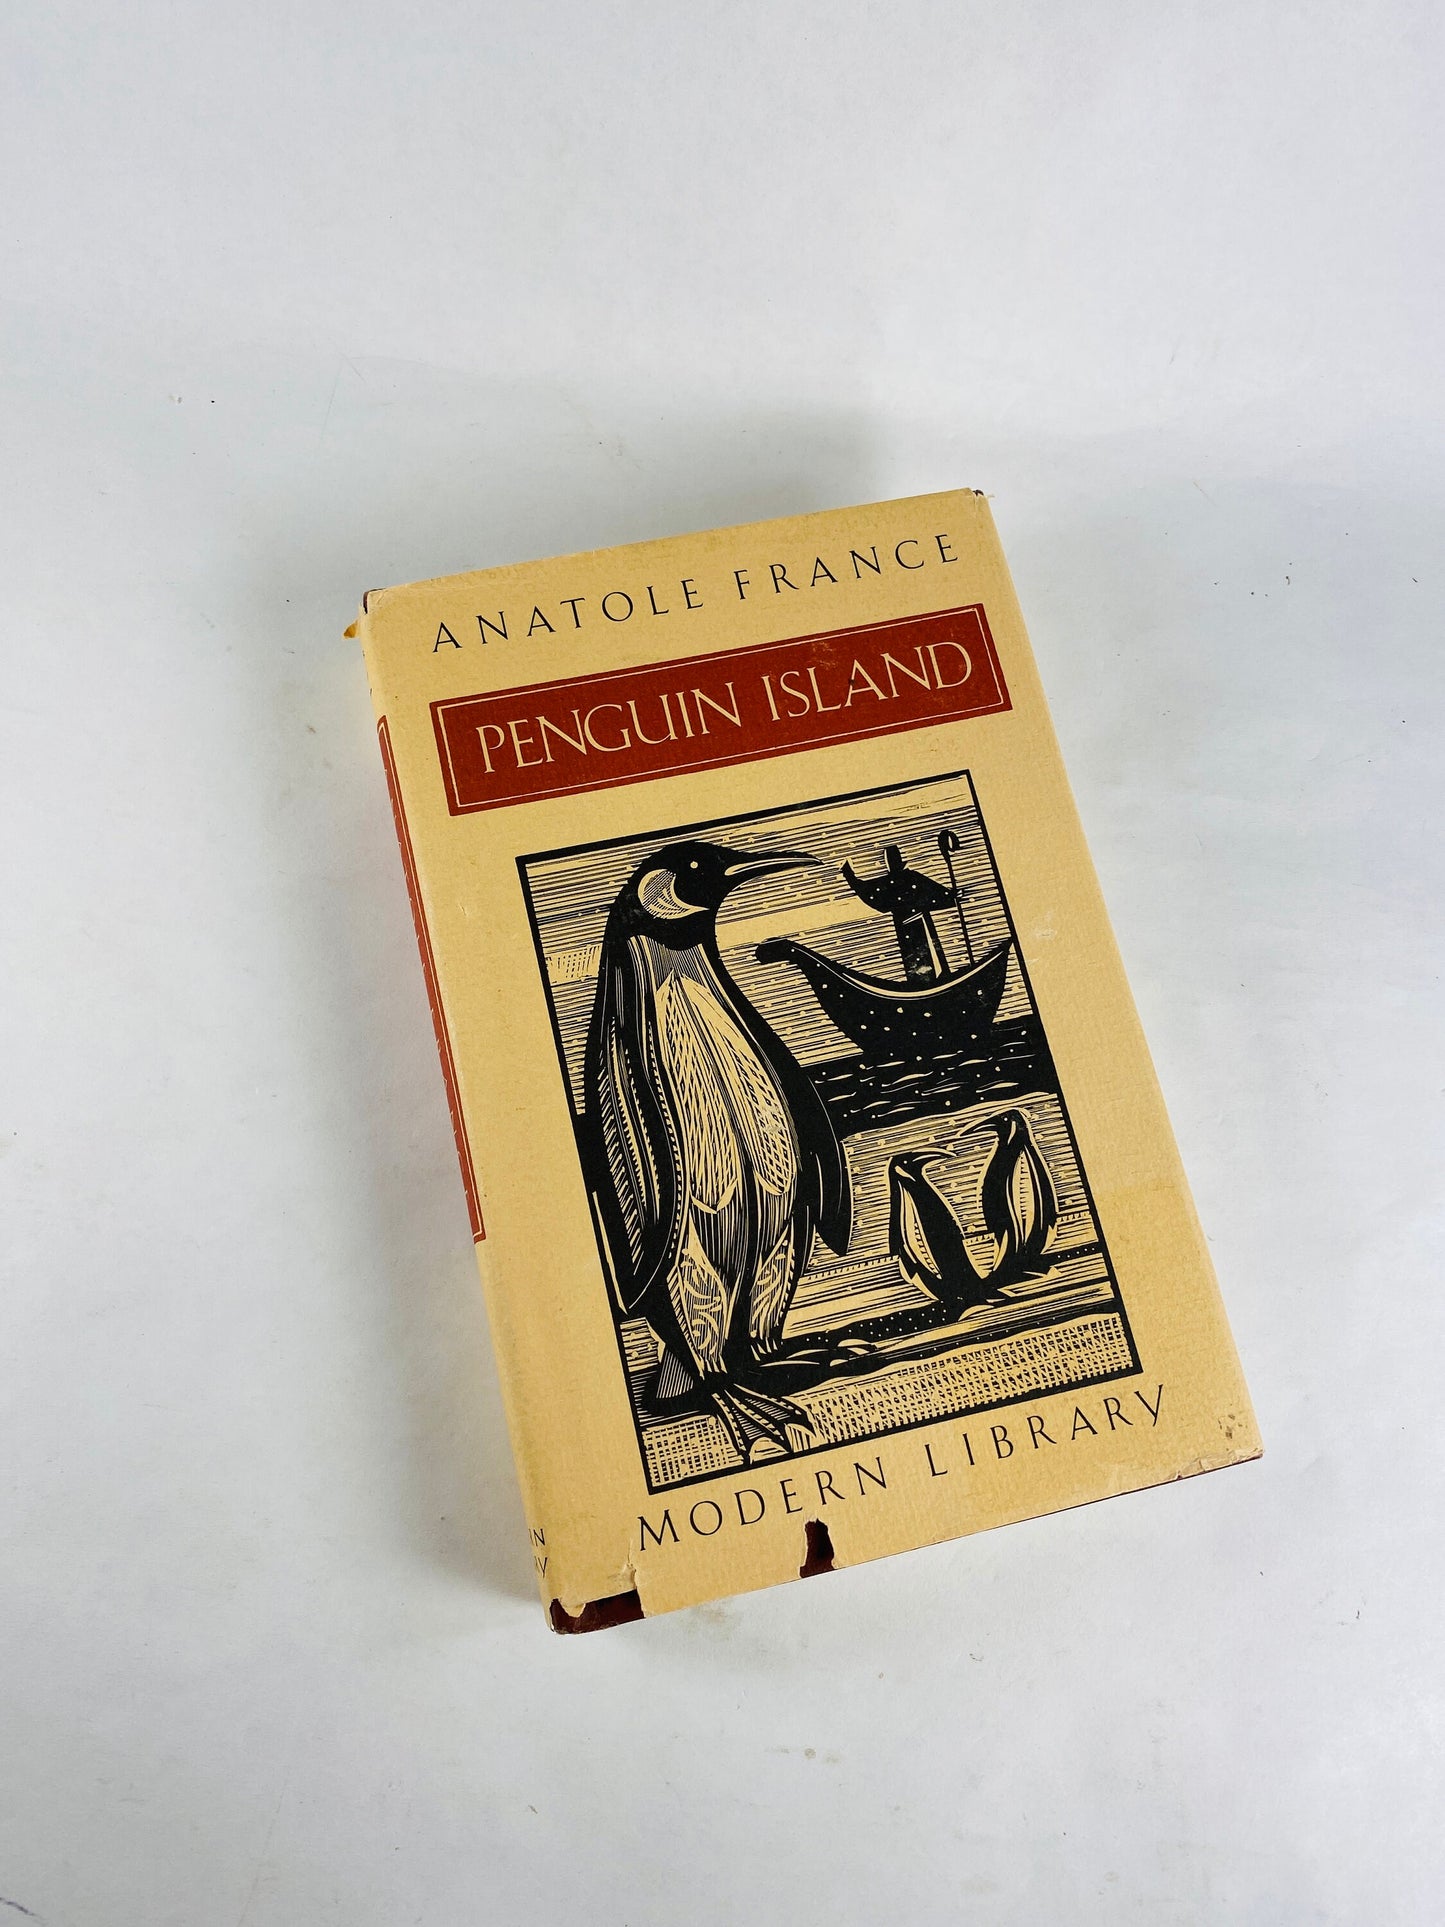 Penguin Island by Anatole France vintage Modern Library book with dust jacket Satirical fantasy novel, Nobel Prize for Literature winner